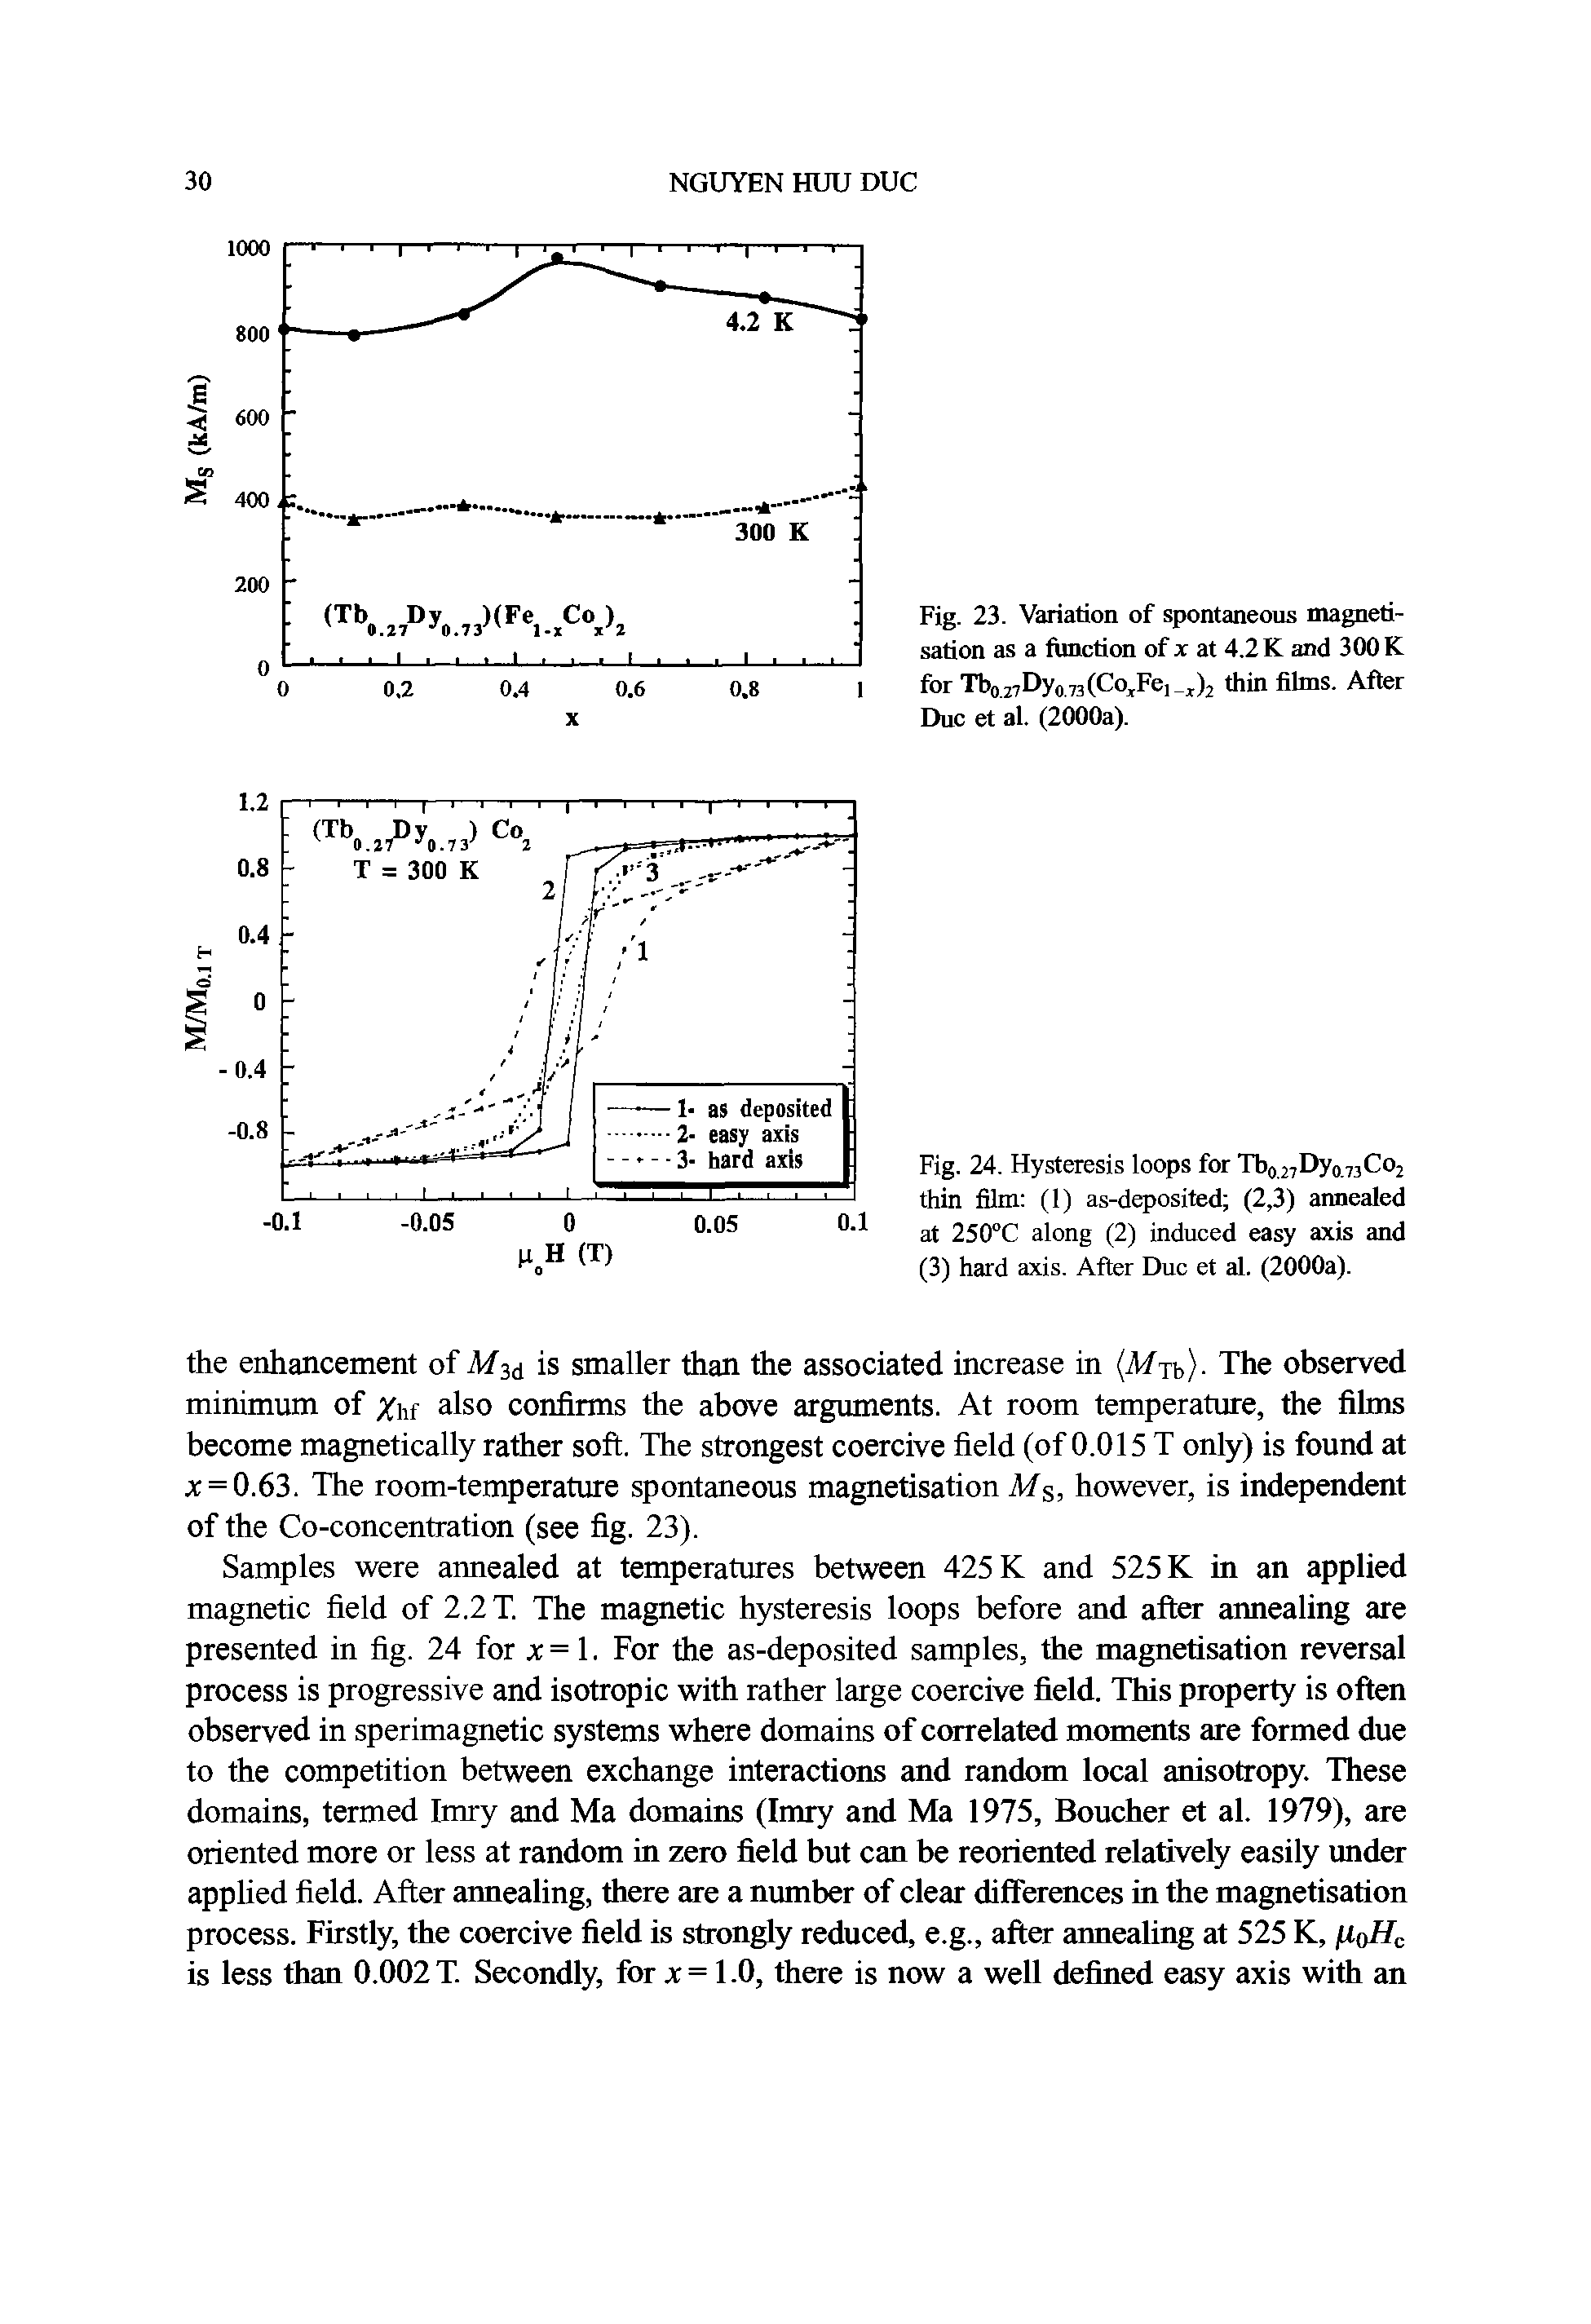 Fig. 24. Hysteresis loops for Tbo27Dyo,73Co2 thin film (1) as-deposited (2,3) annealed at 250"C along (2) induced easy axis and (3) hard axis. After Due et al. (2000a).